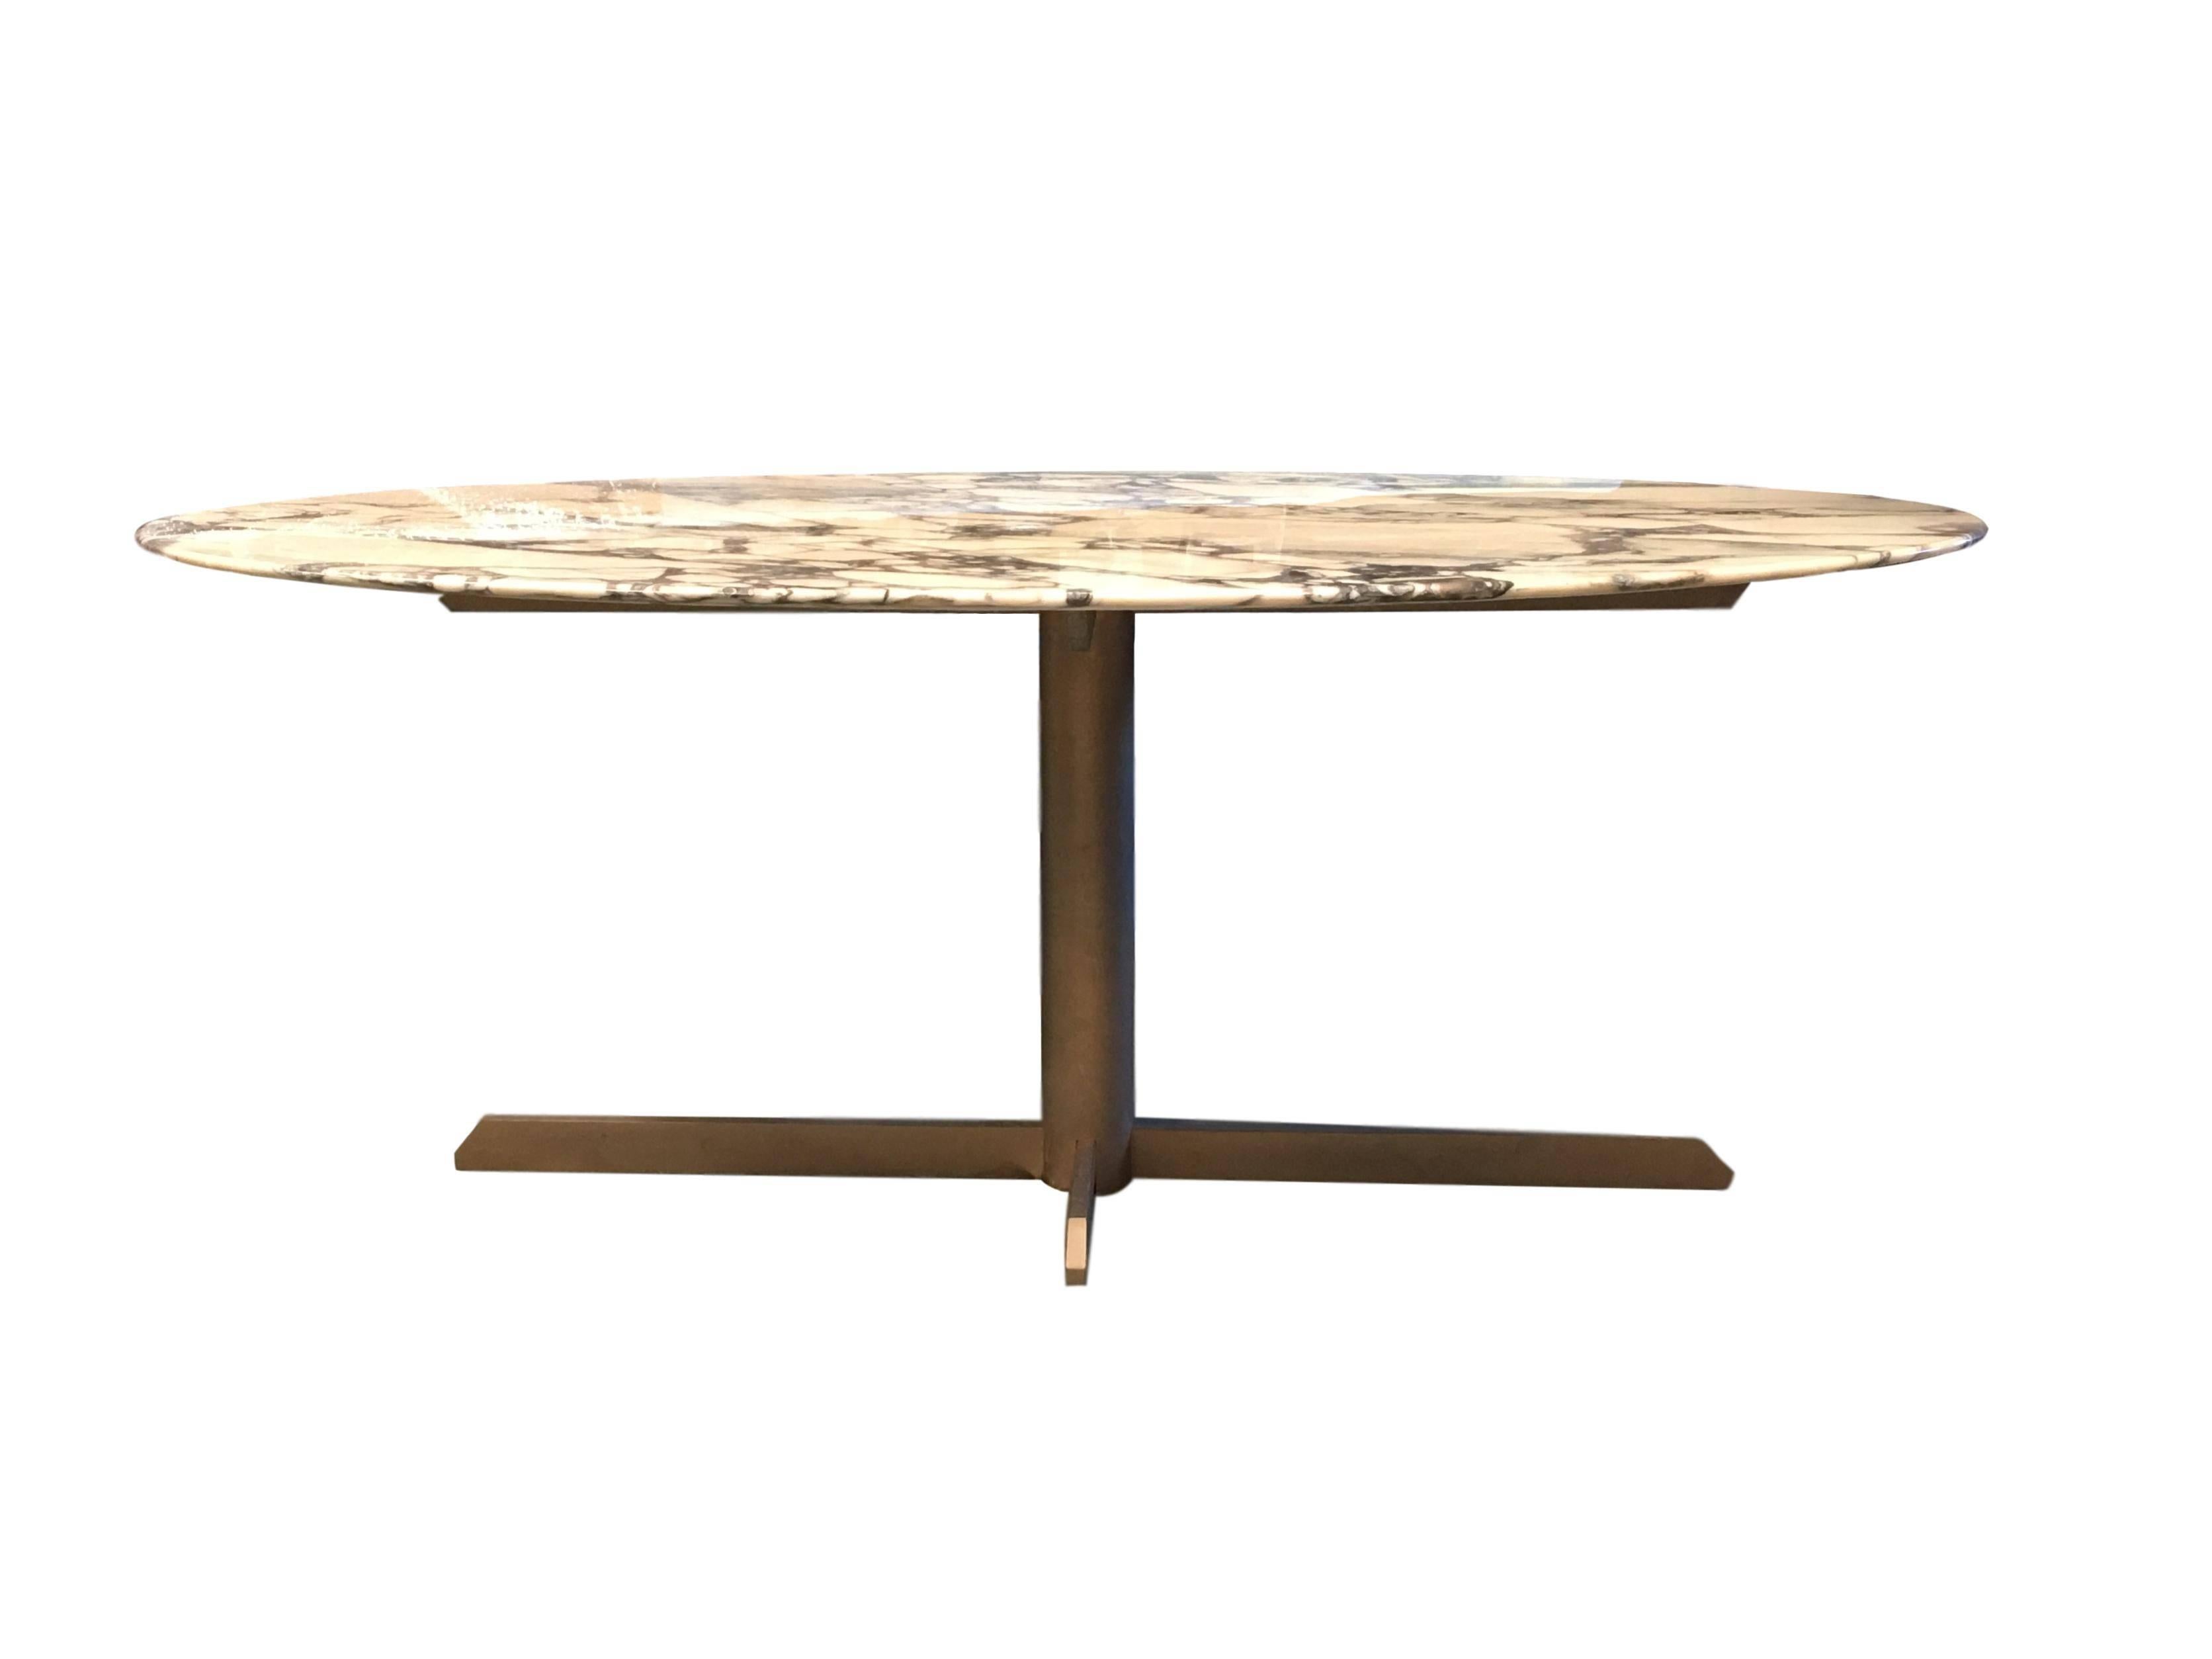 1950s Italian oval marble dining table on sculptural brass base
An exceptional 1950s Italian elliptical dining table consisting of an oval 'surfboard' shaped off-white marble top with black veins supported by a sculpted cast brass base and four